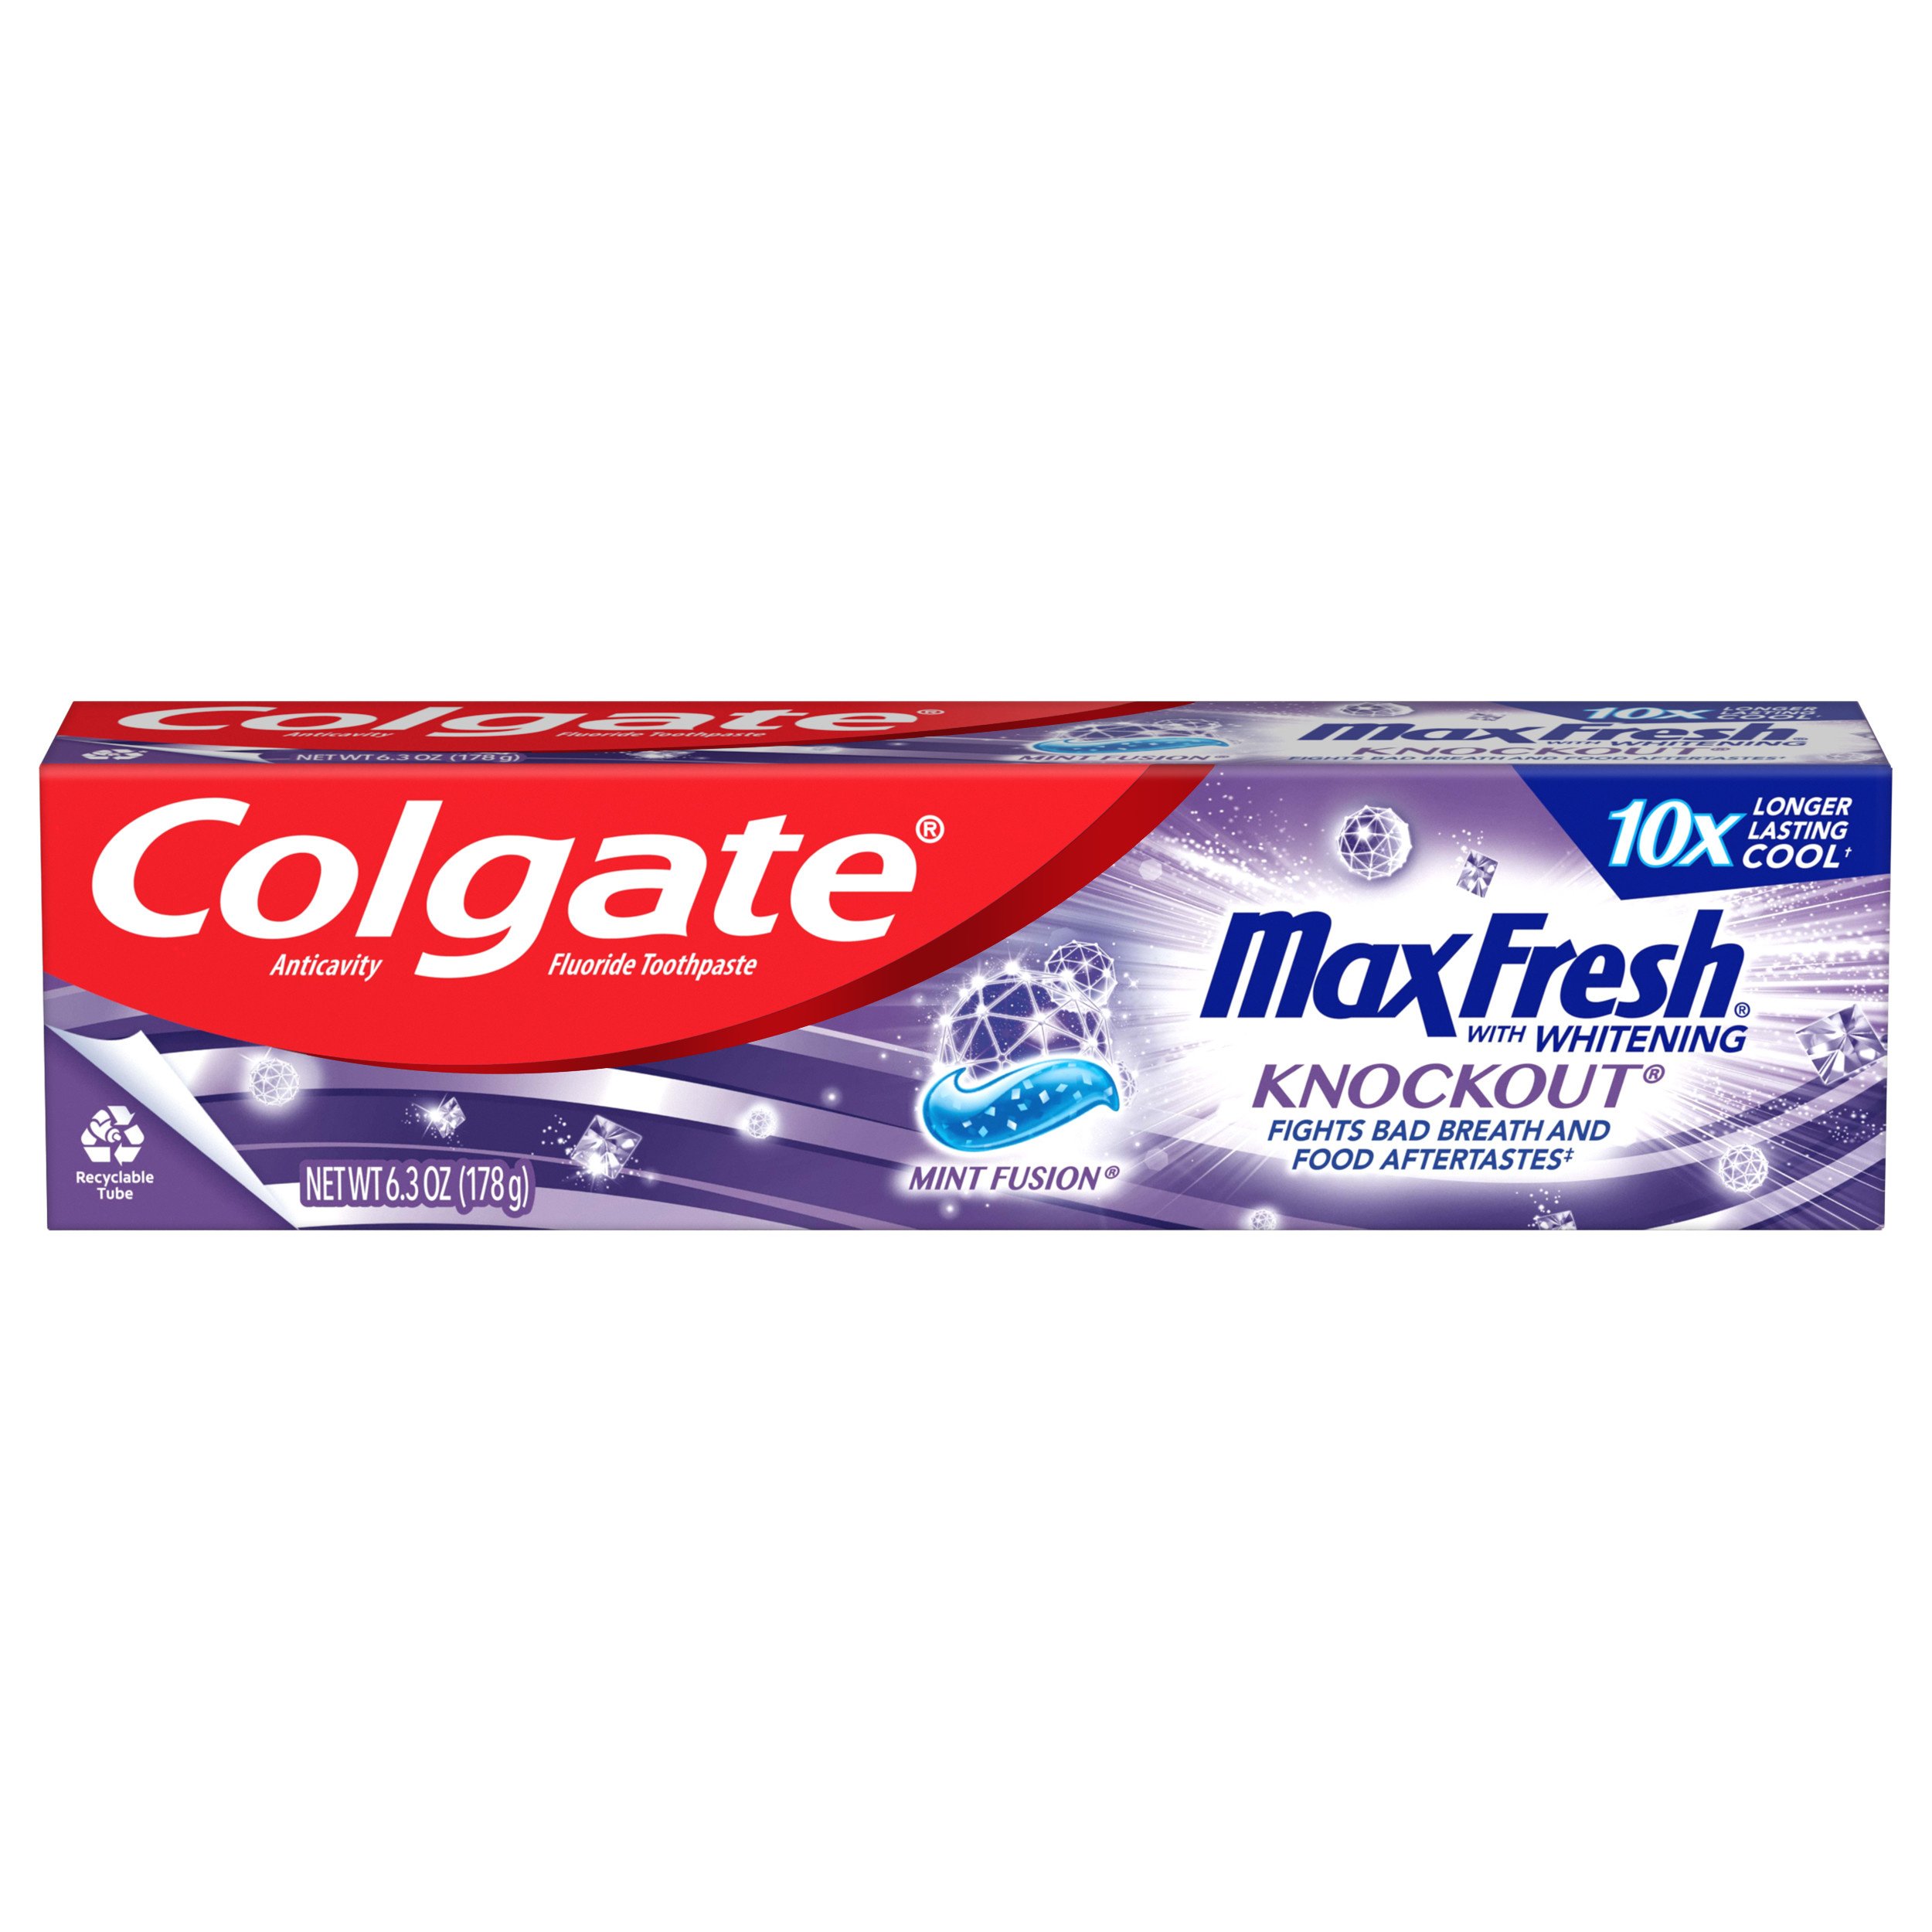 colgate-max-fresh-anticavity-toothpaste-mint-fusion-shop-toothpaste